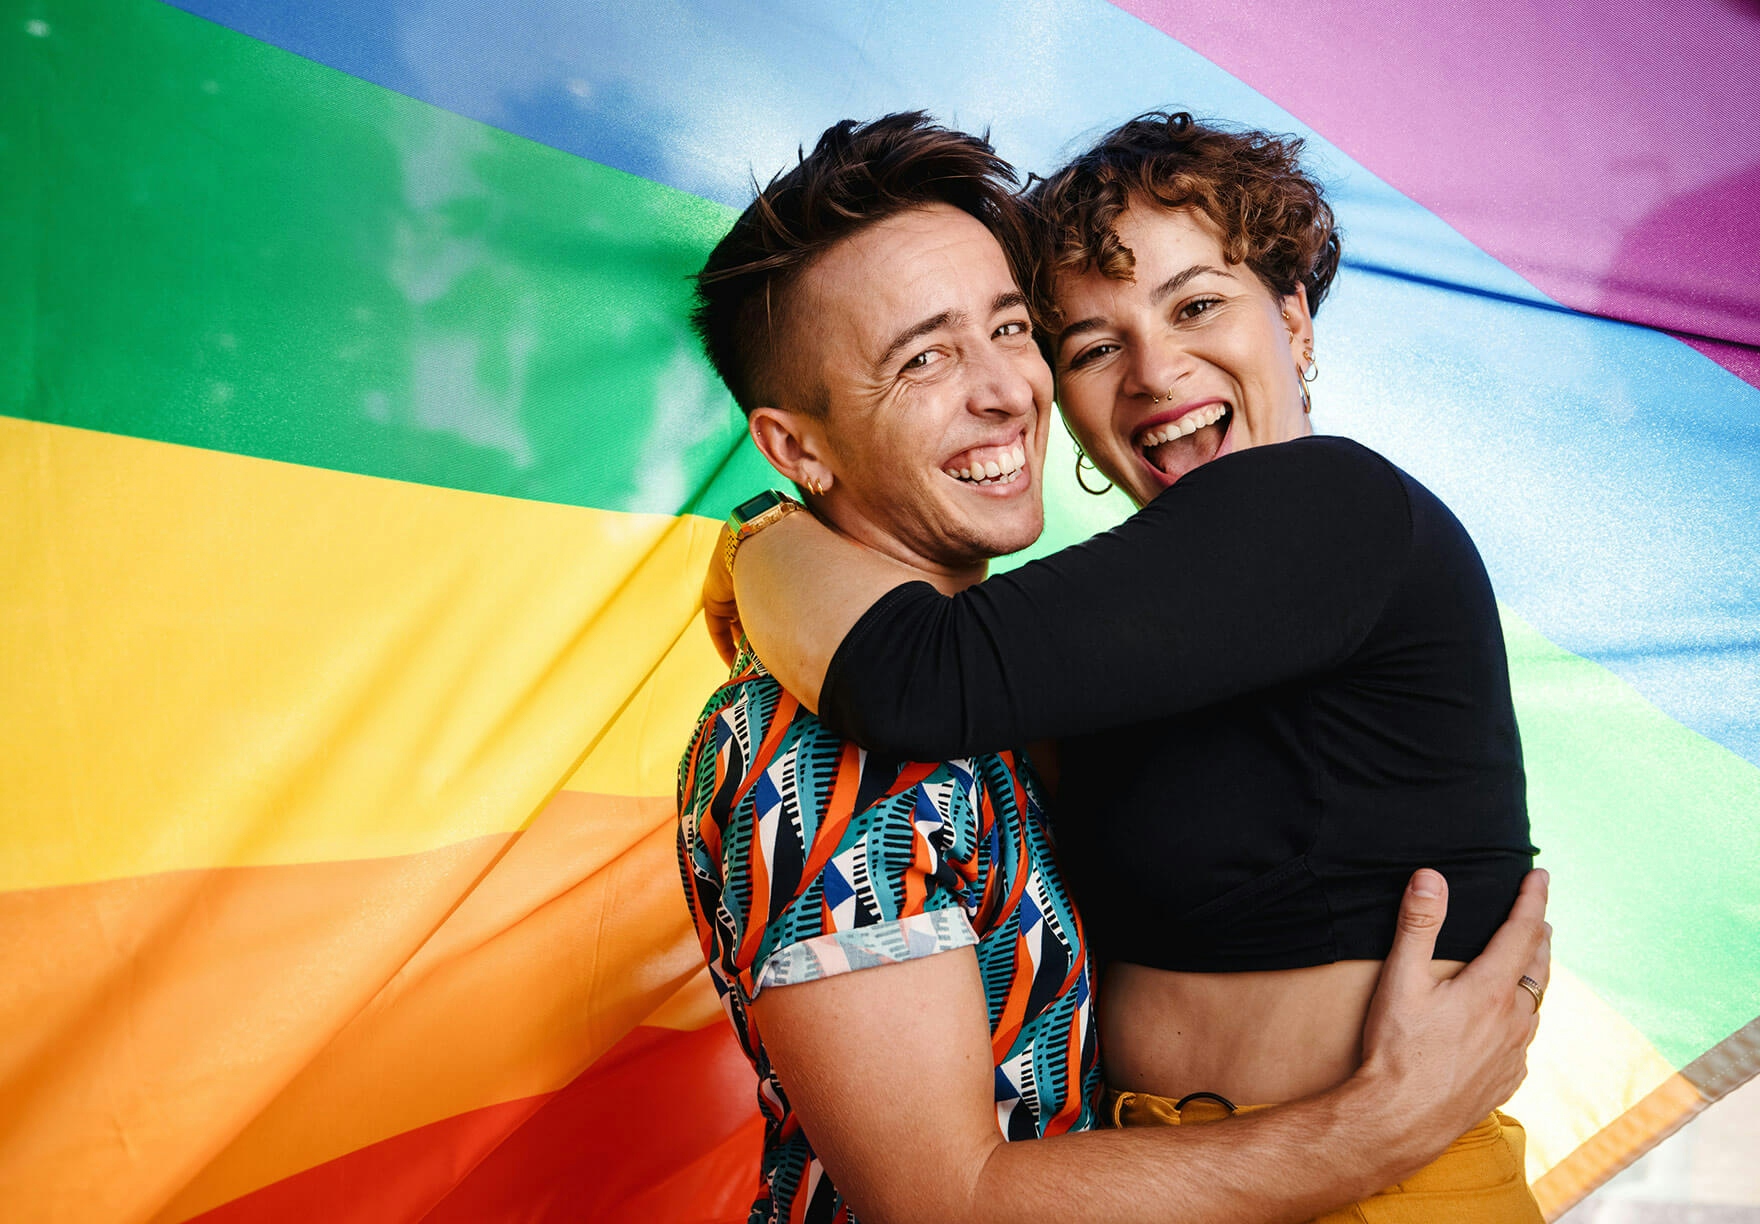 A smiling couple embraces in front of a Pride flag